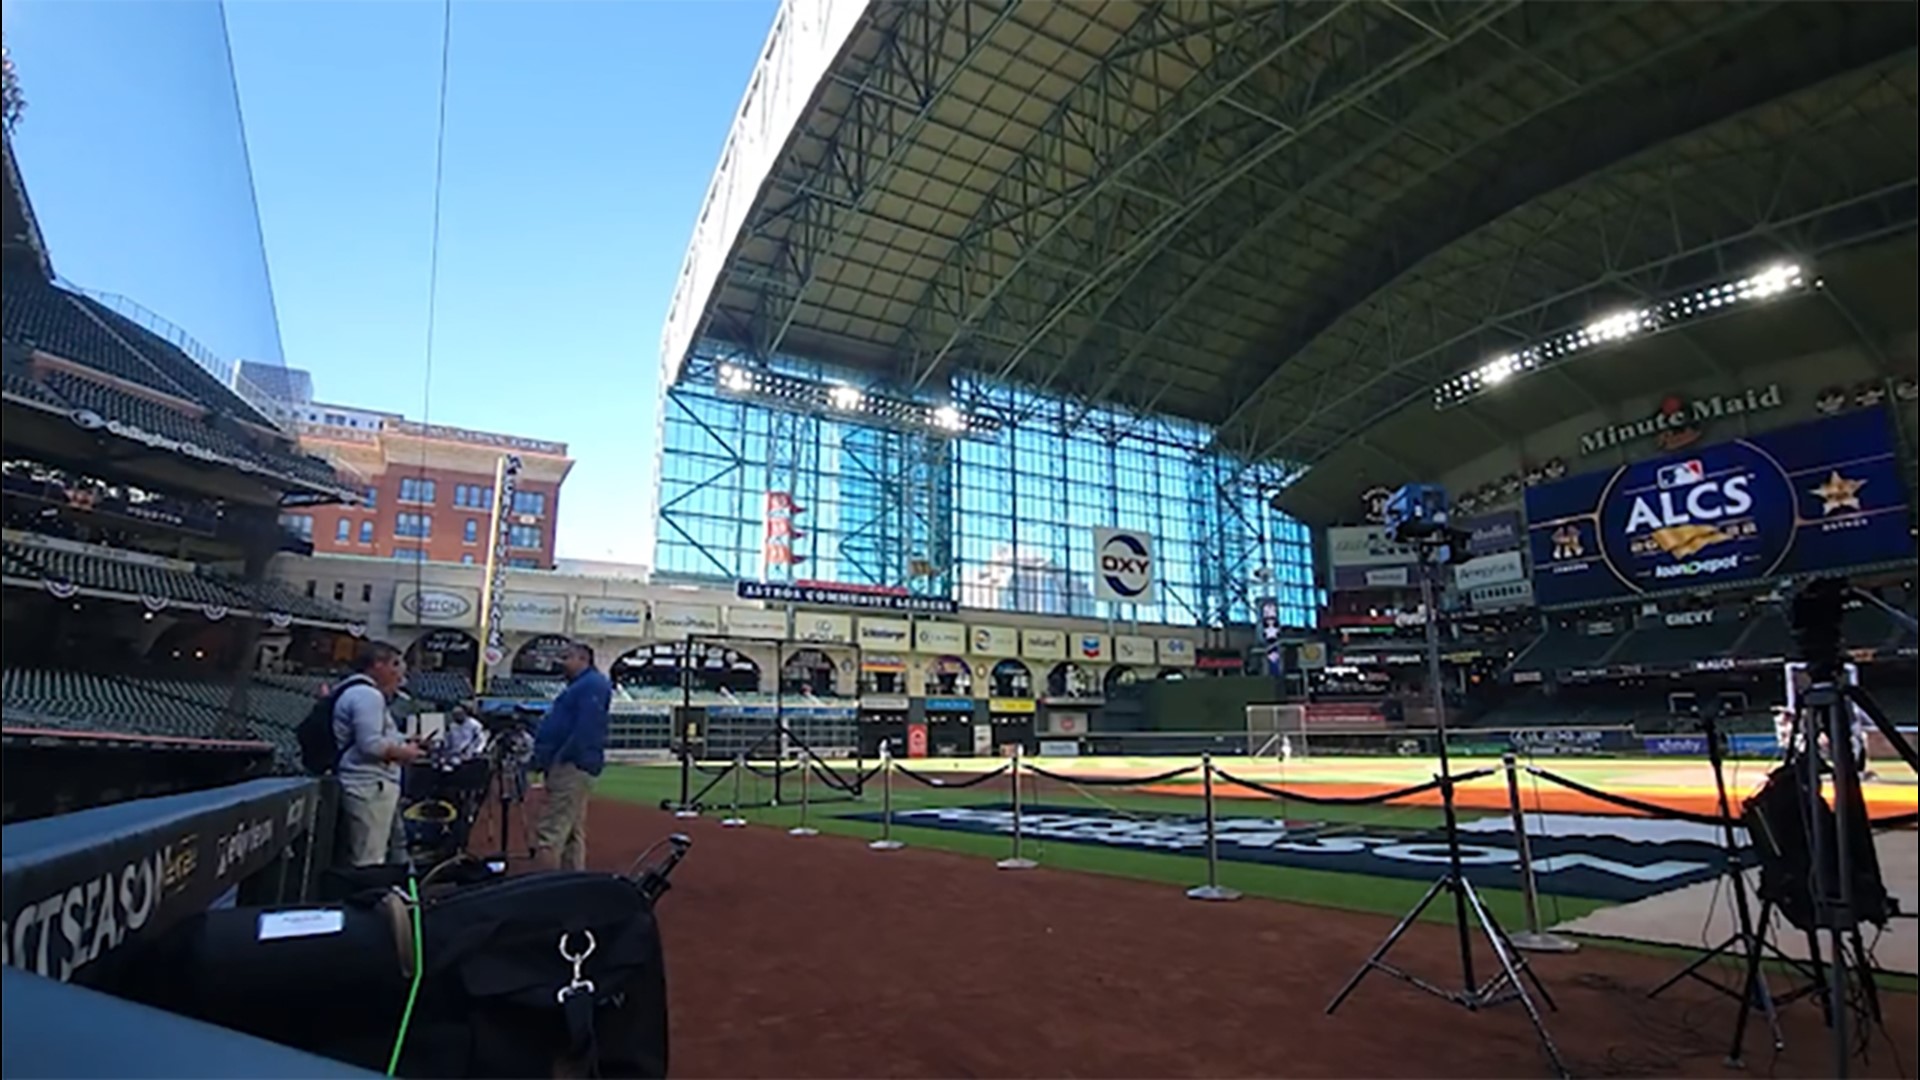 Roof at Minute Maid Park to be closed for Rangers vs. Astros ALCS Game 1